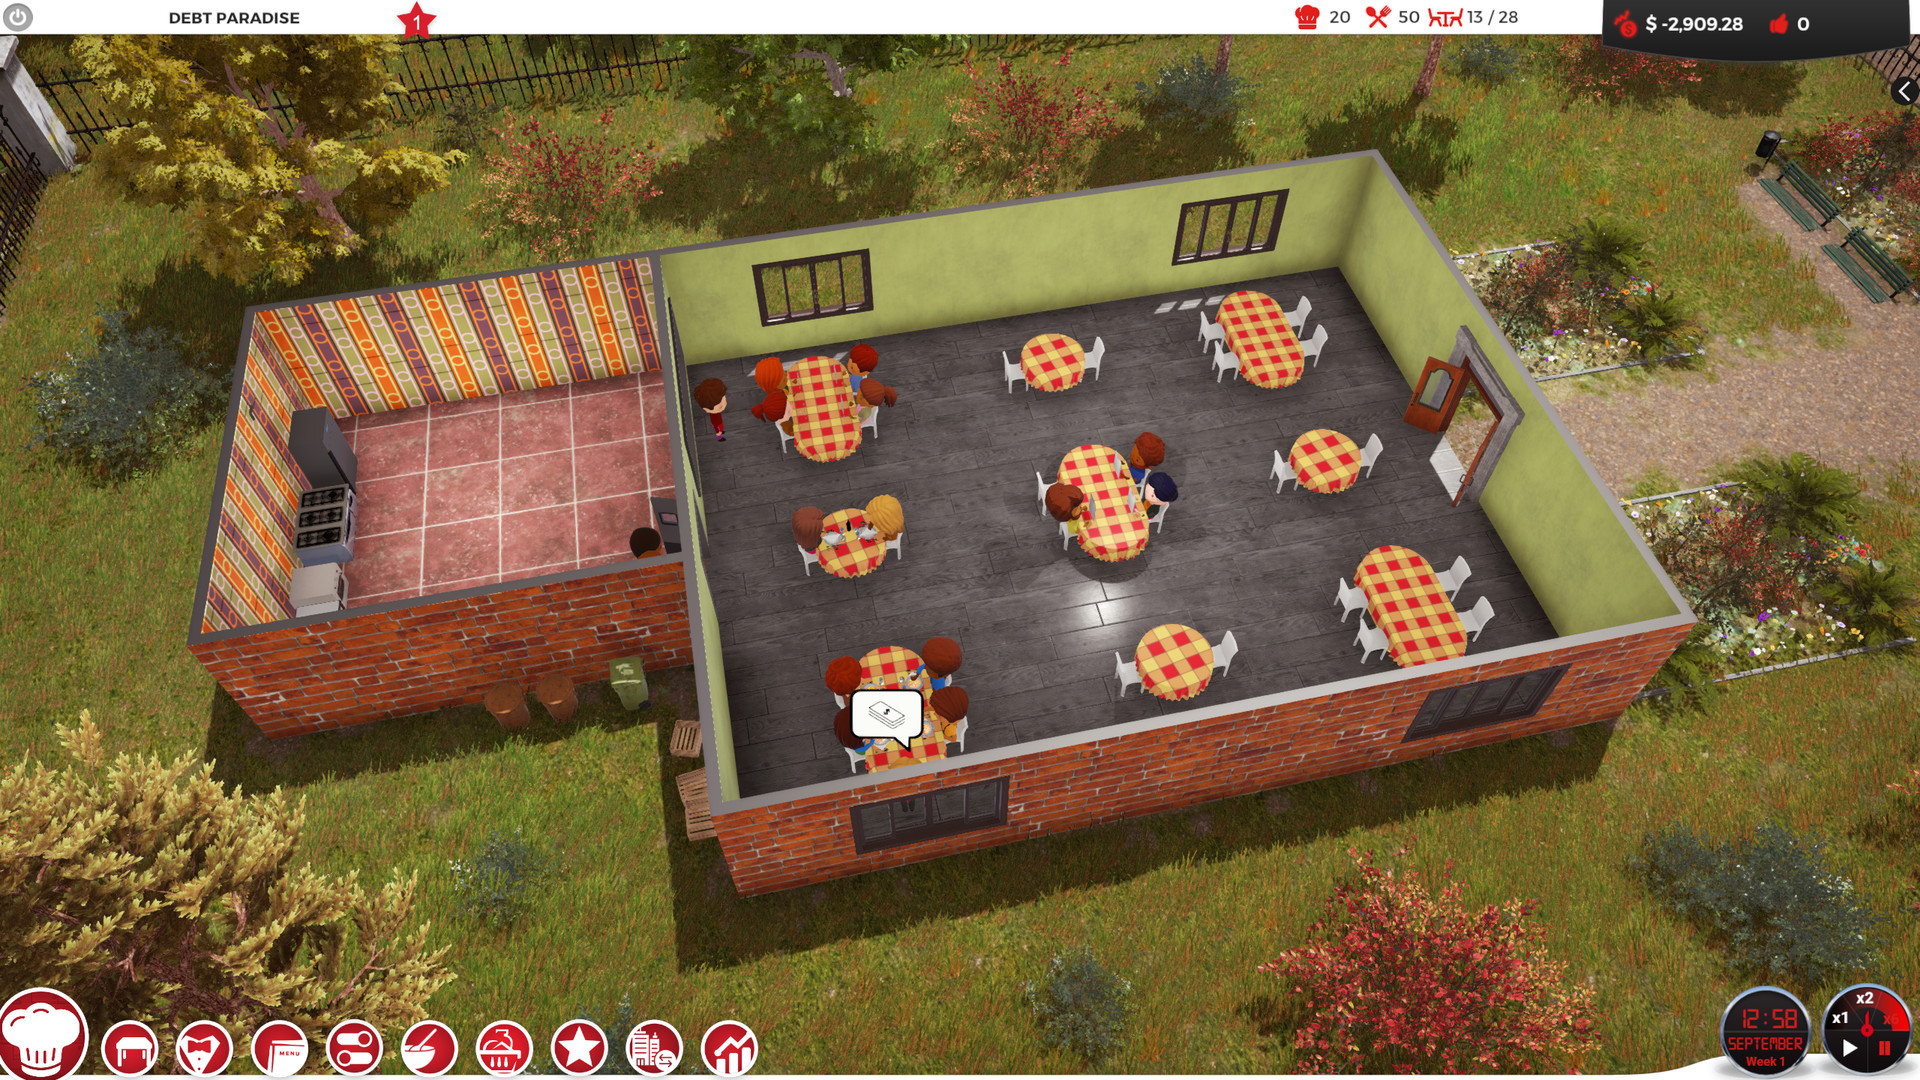 Download Chef: A Restaurant Tycoon Game Full PC/MAC Game